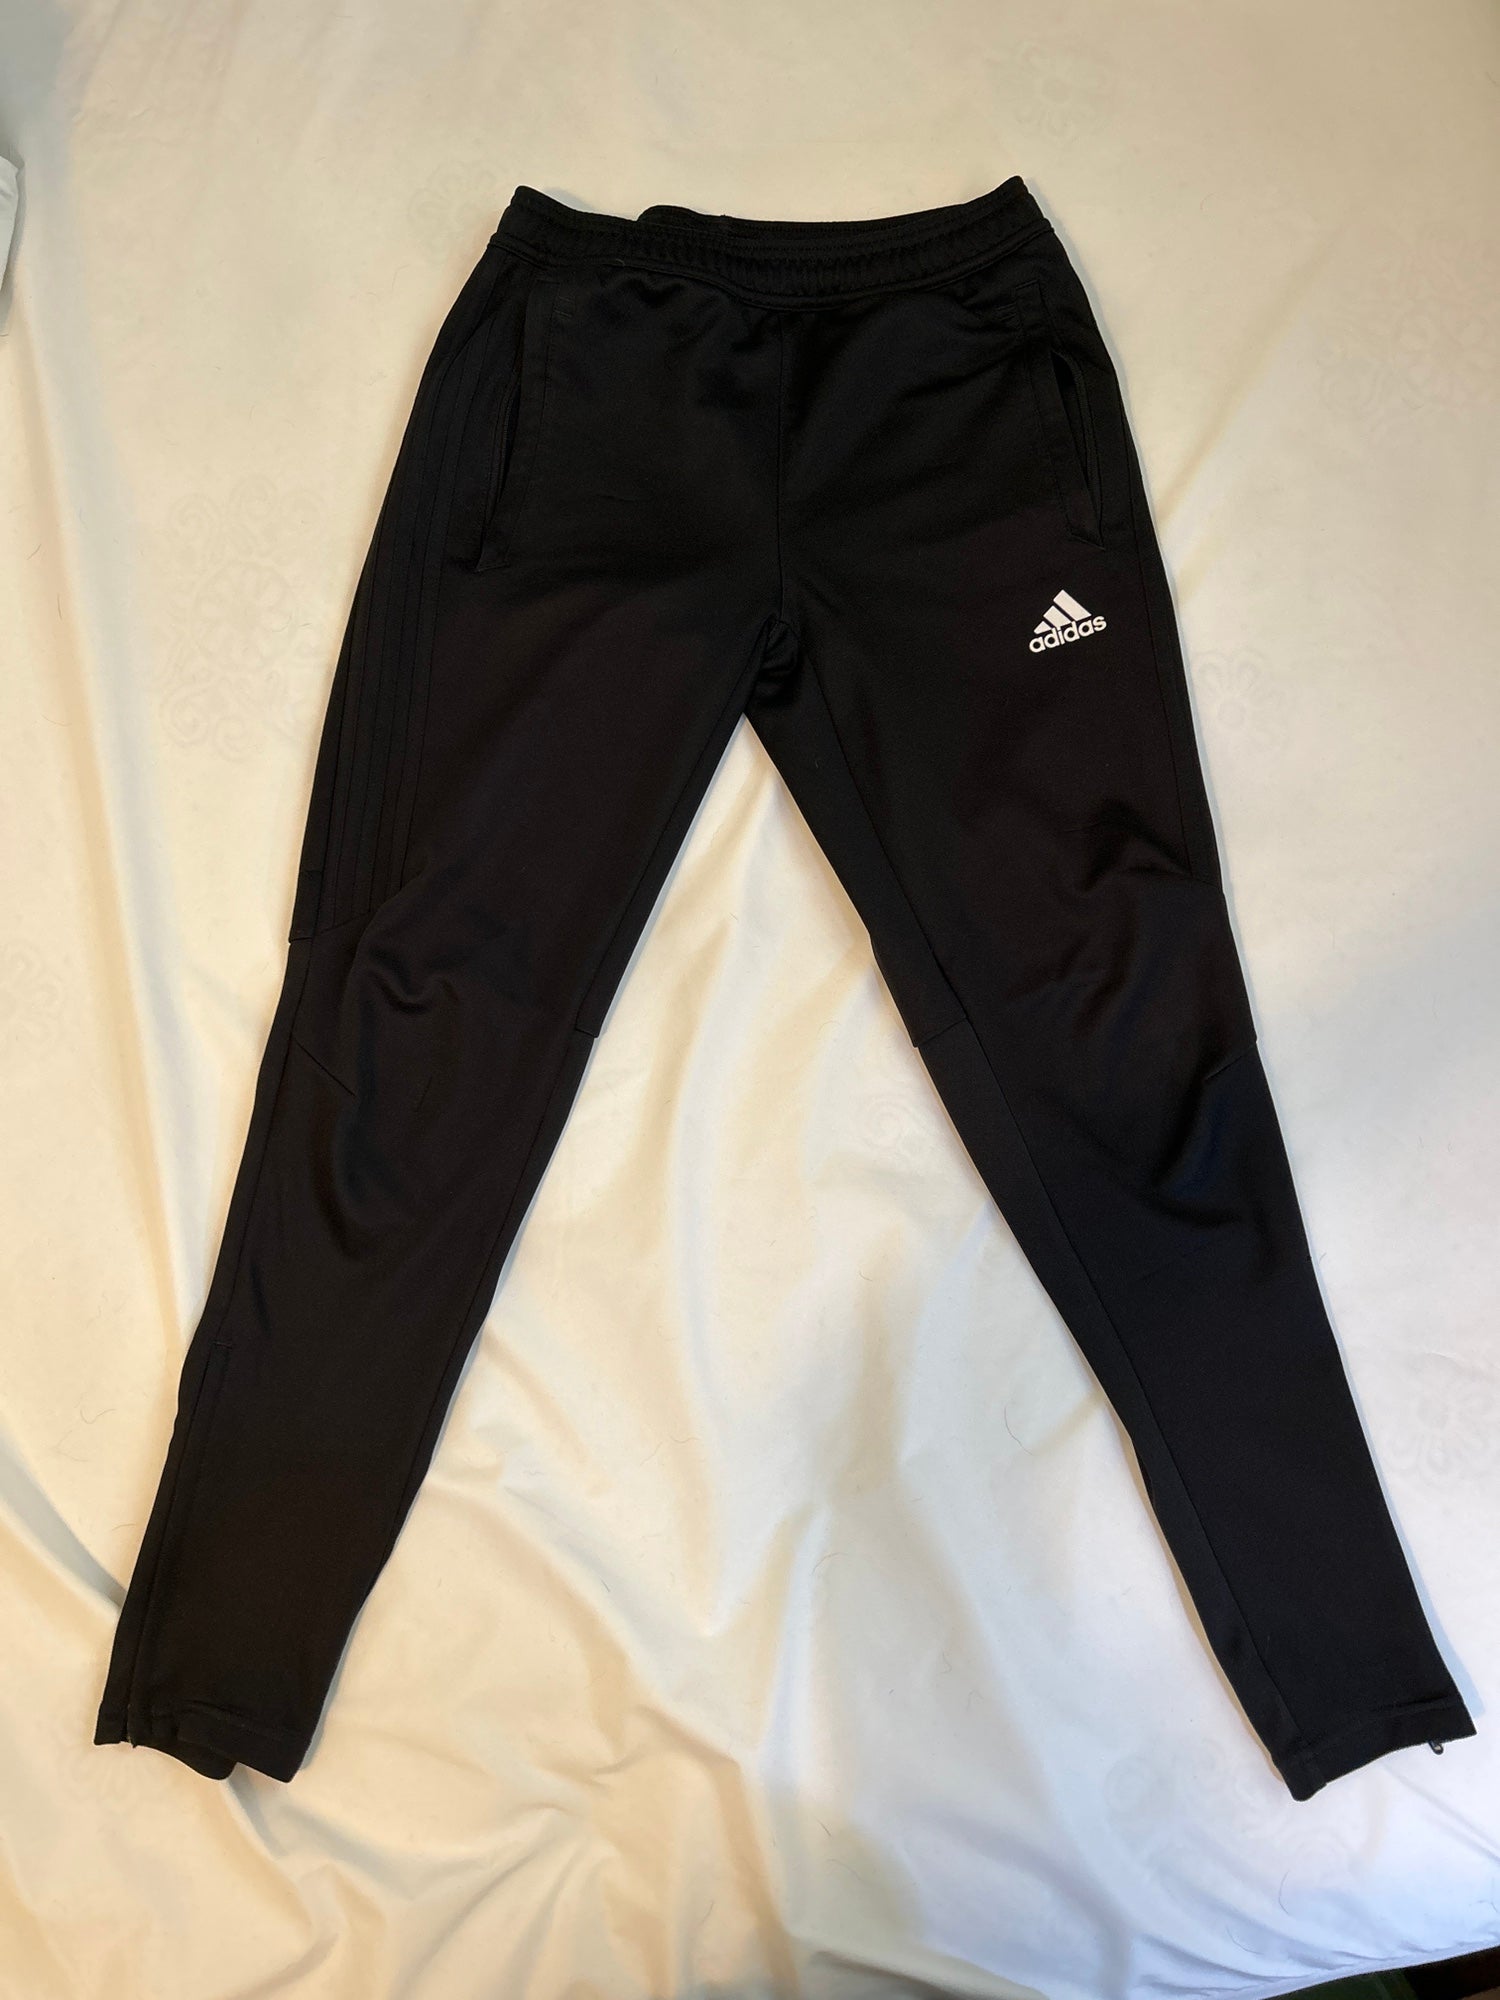 Adidas Youth Soccer Tiro 17 Pants Review  YouTube